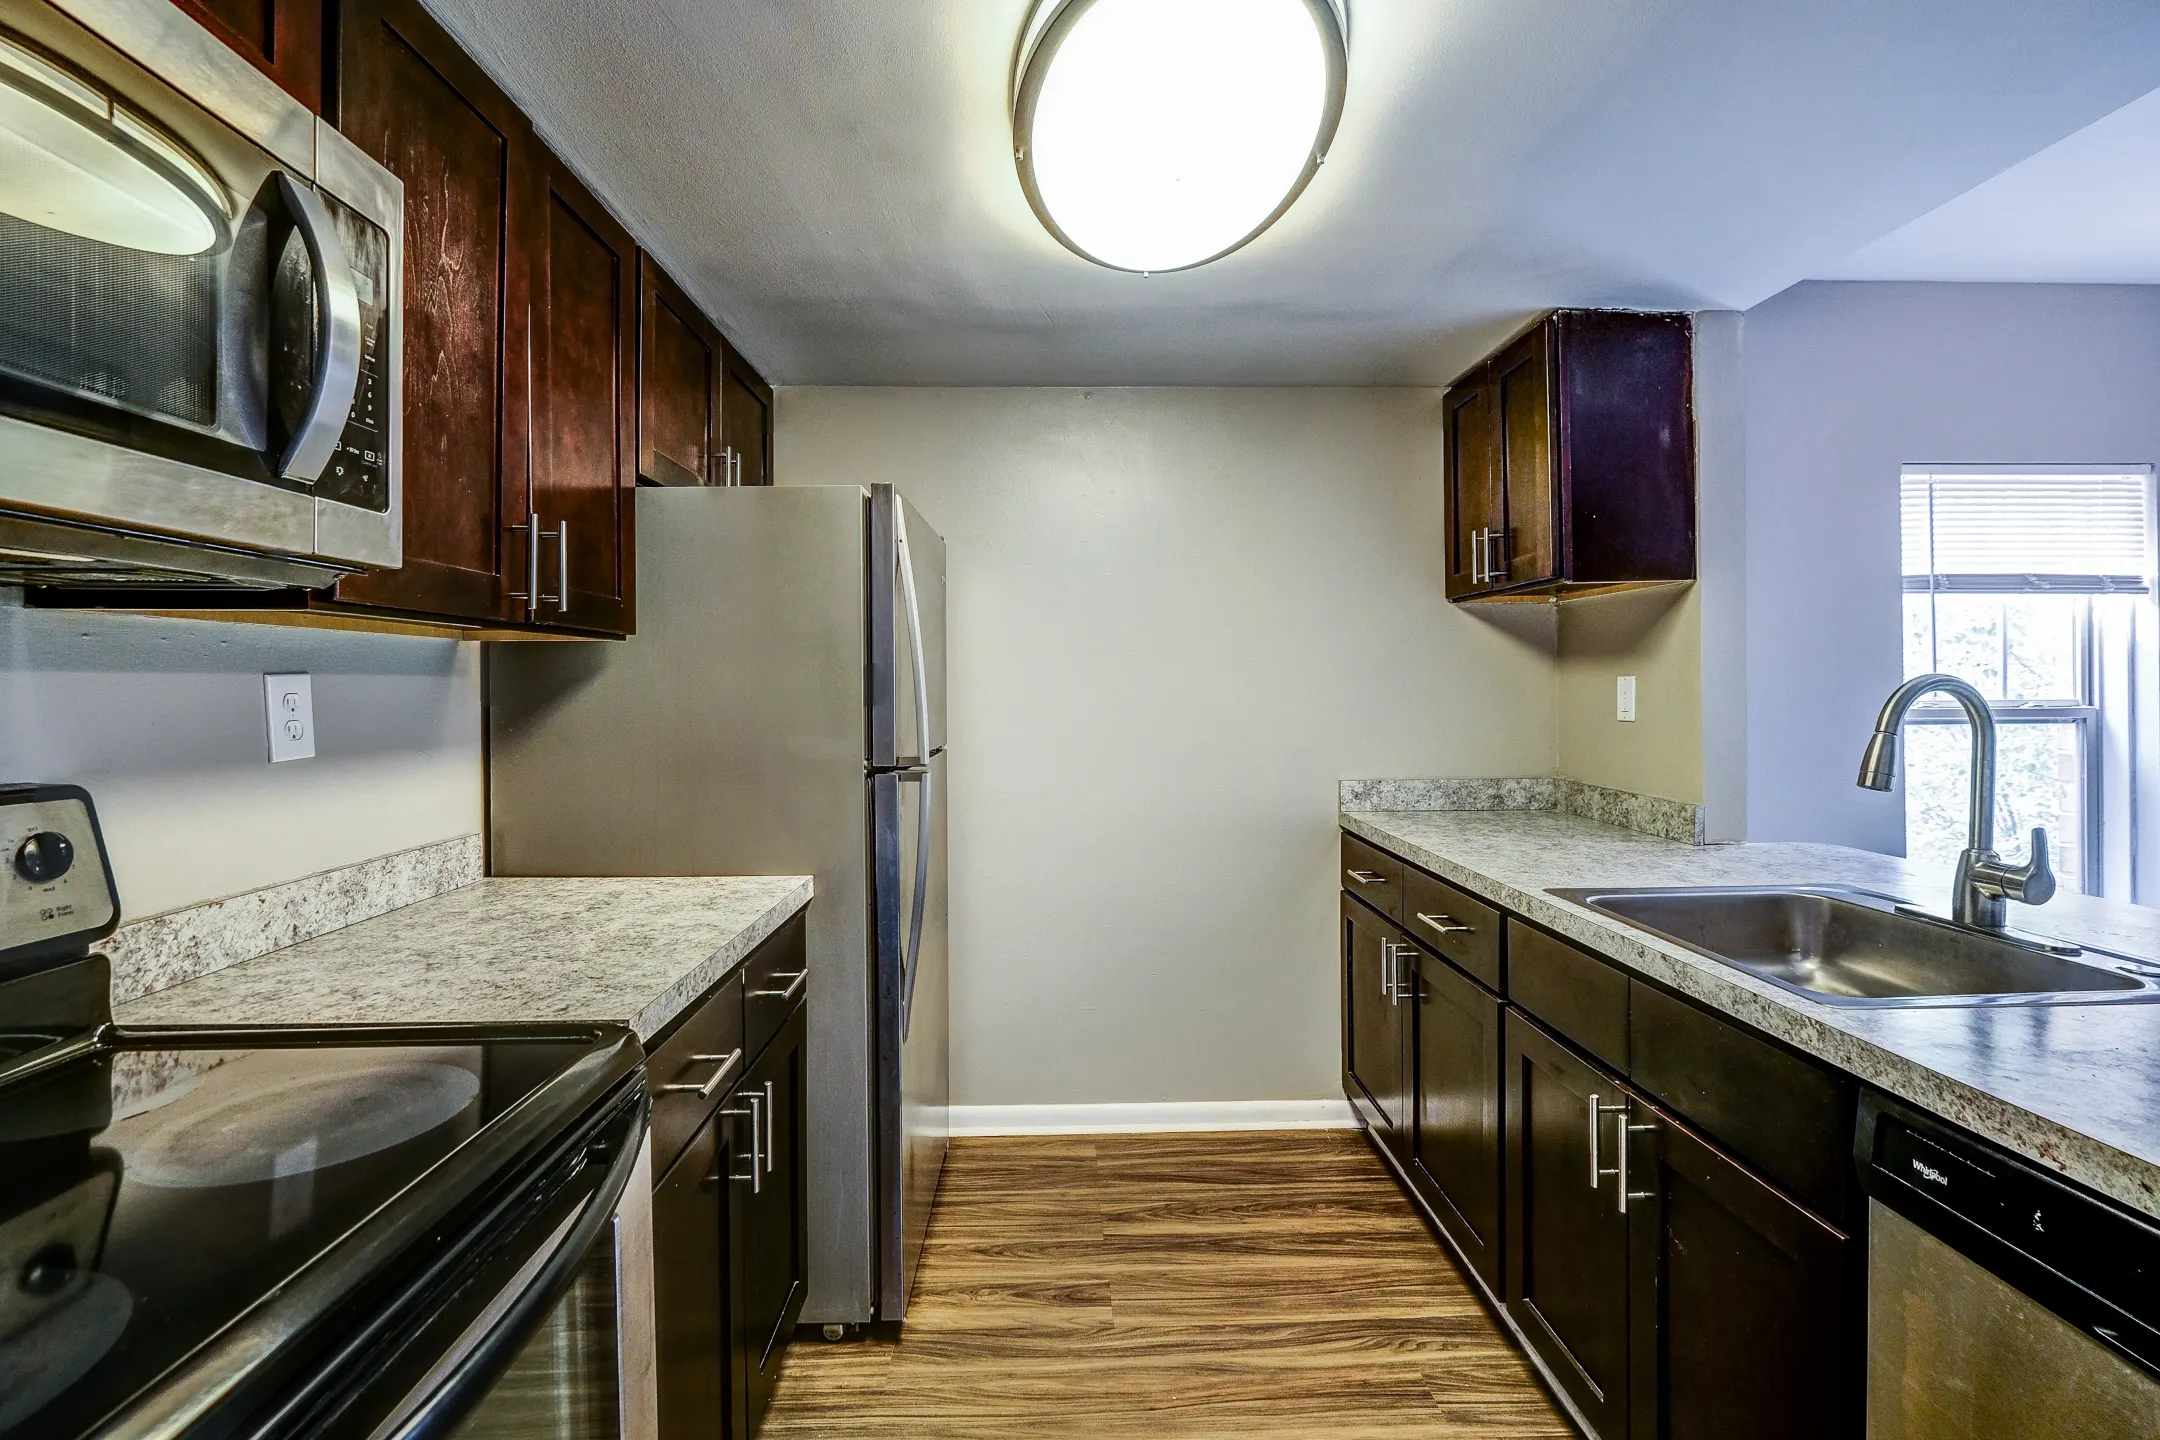 Kitchen - Mulberry Station Apartments - Harrisburg, PA